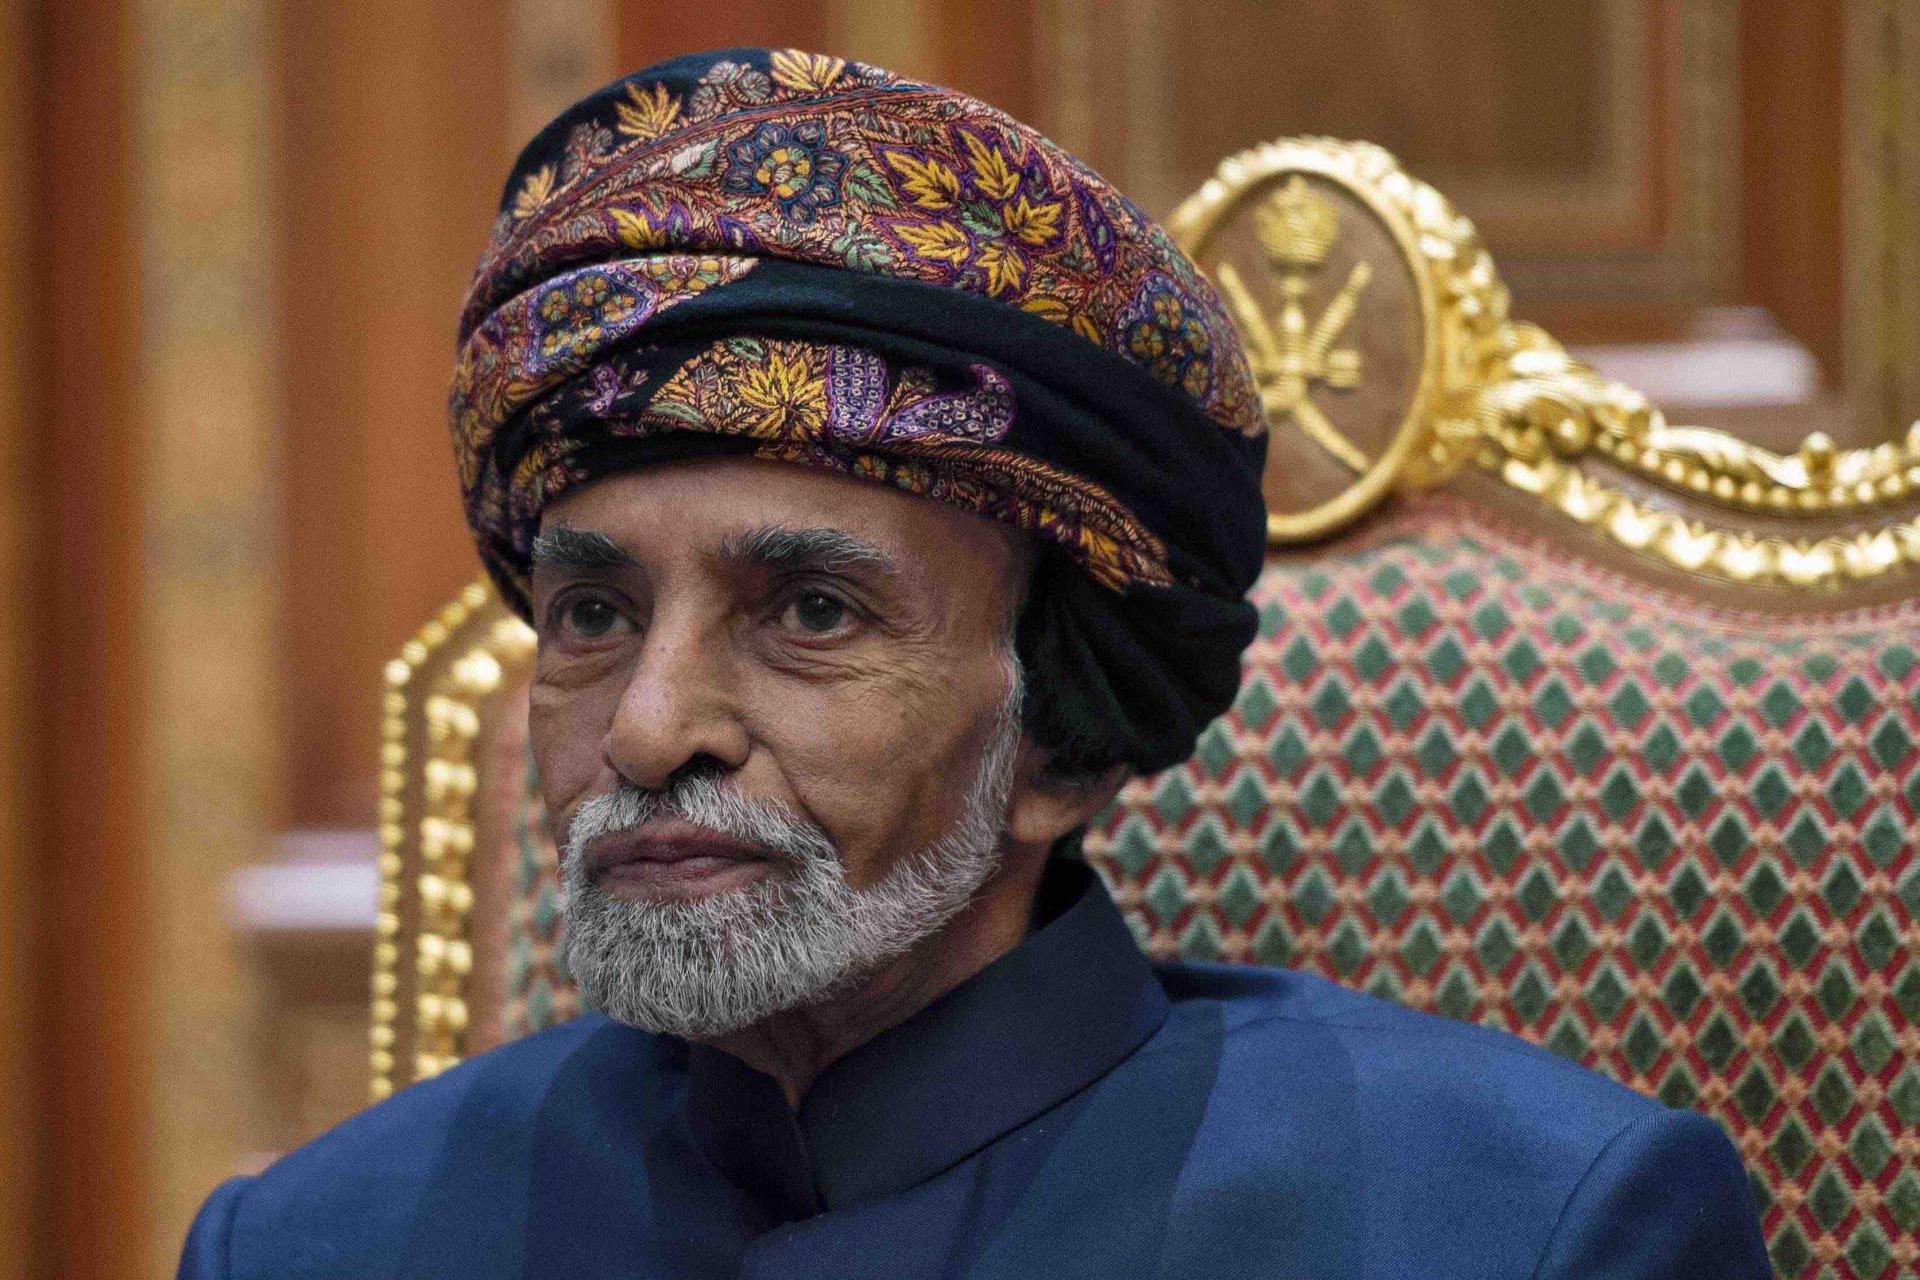 Sultan Qaboos was unmarried and had no apparent heir, meaning that the succession was decided in a meeting of the royal family